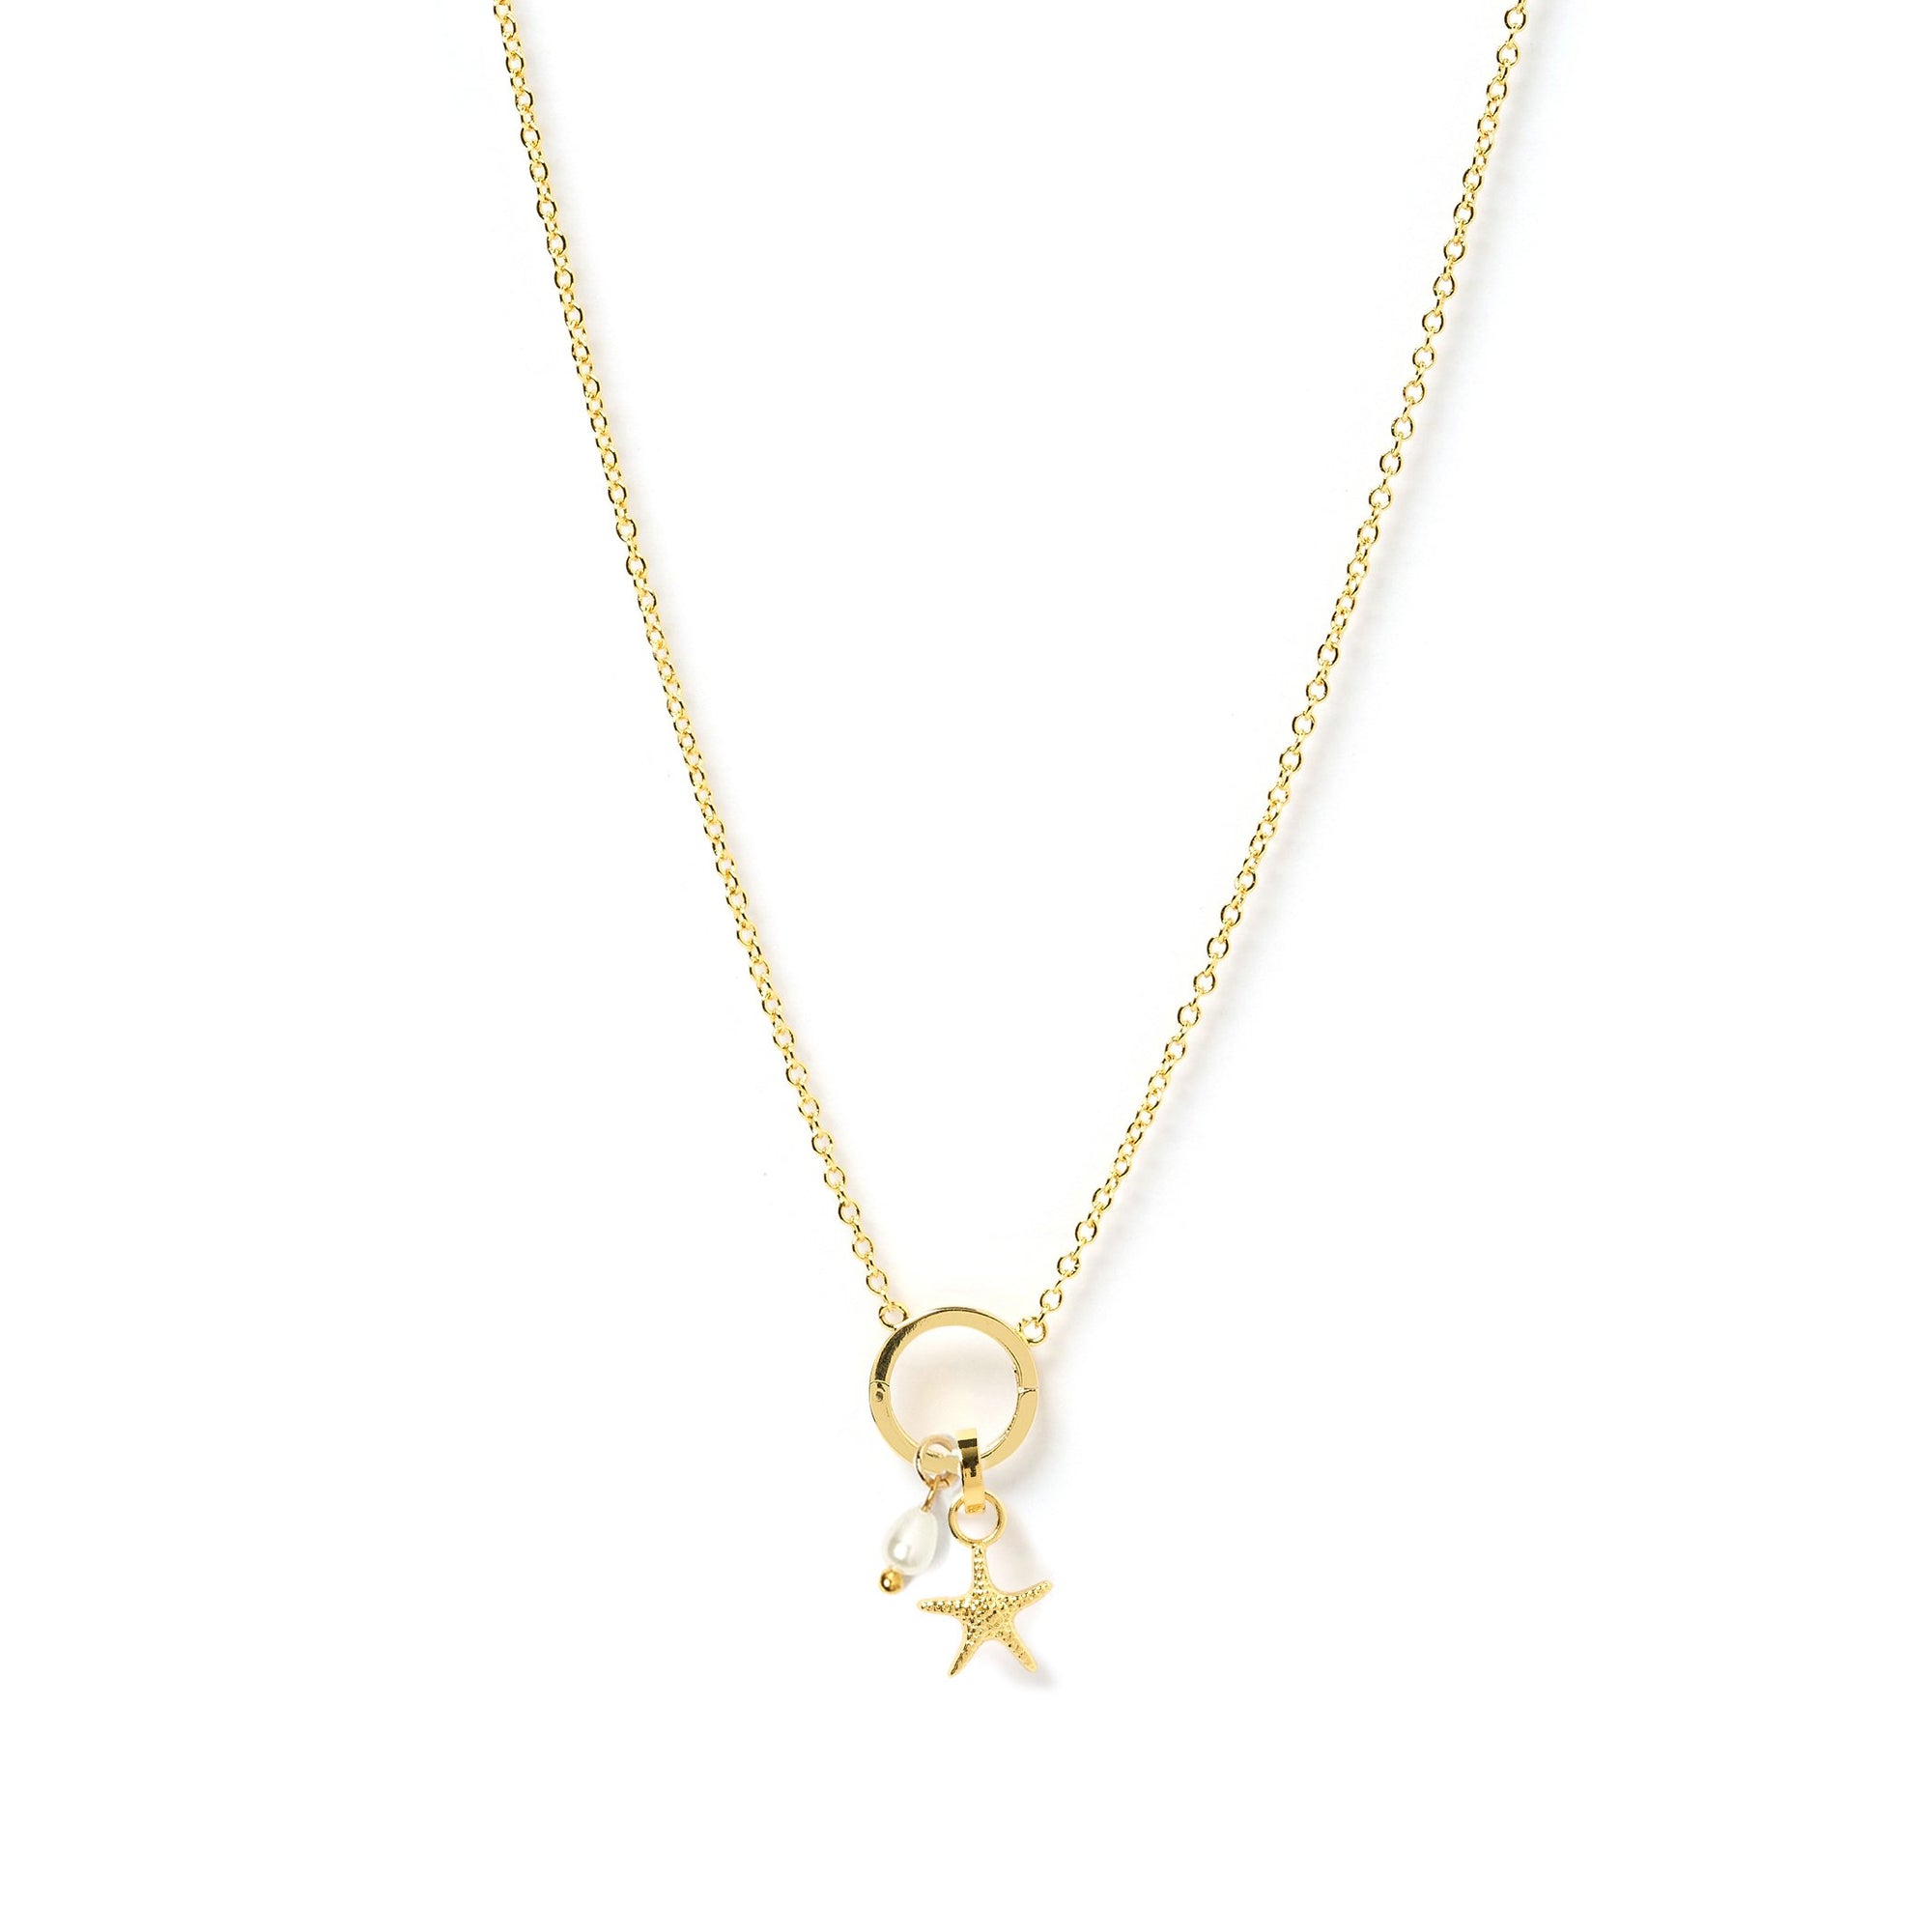 Arms Of Eve Sea Star 'O' charm gold necklace adorned with starfish pendant and elegant pearls